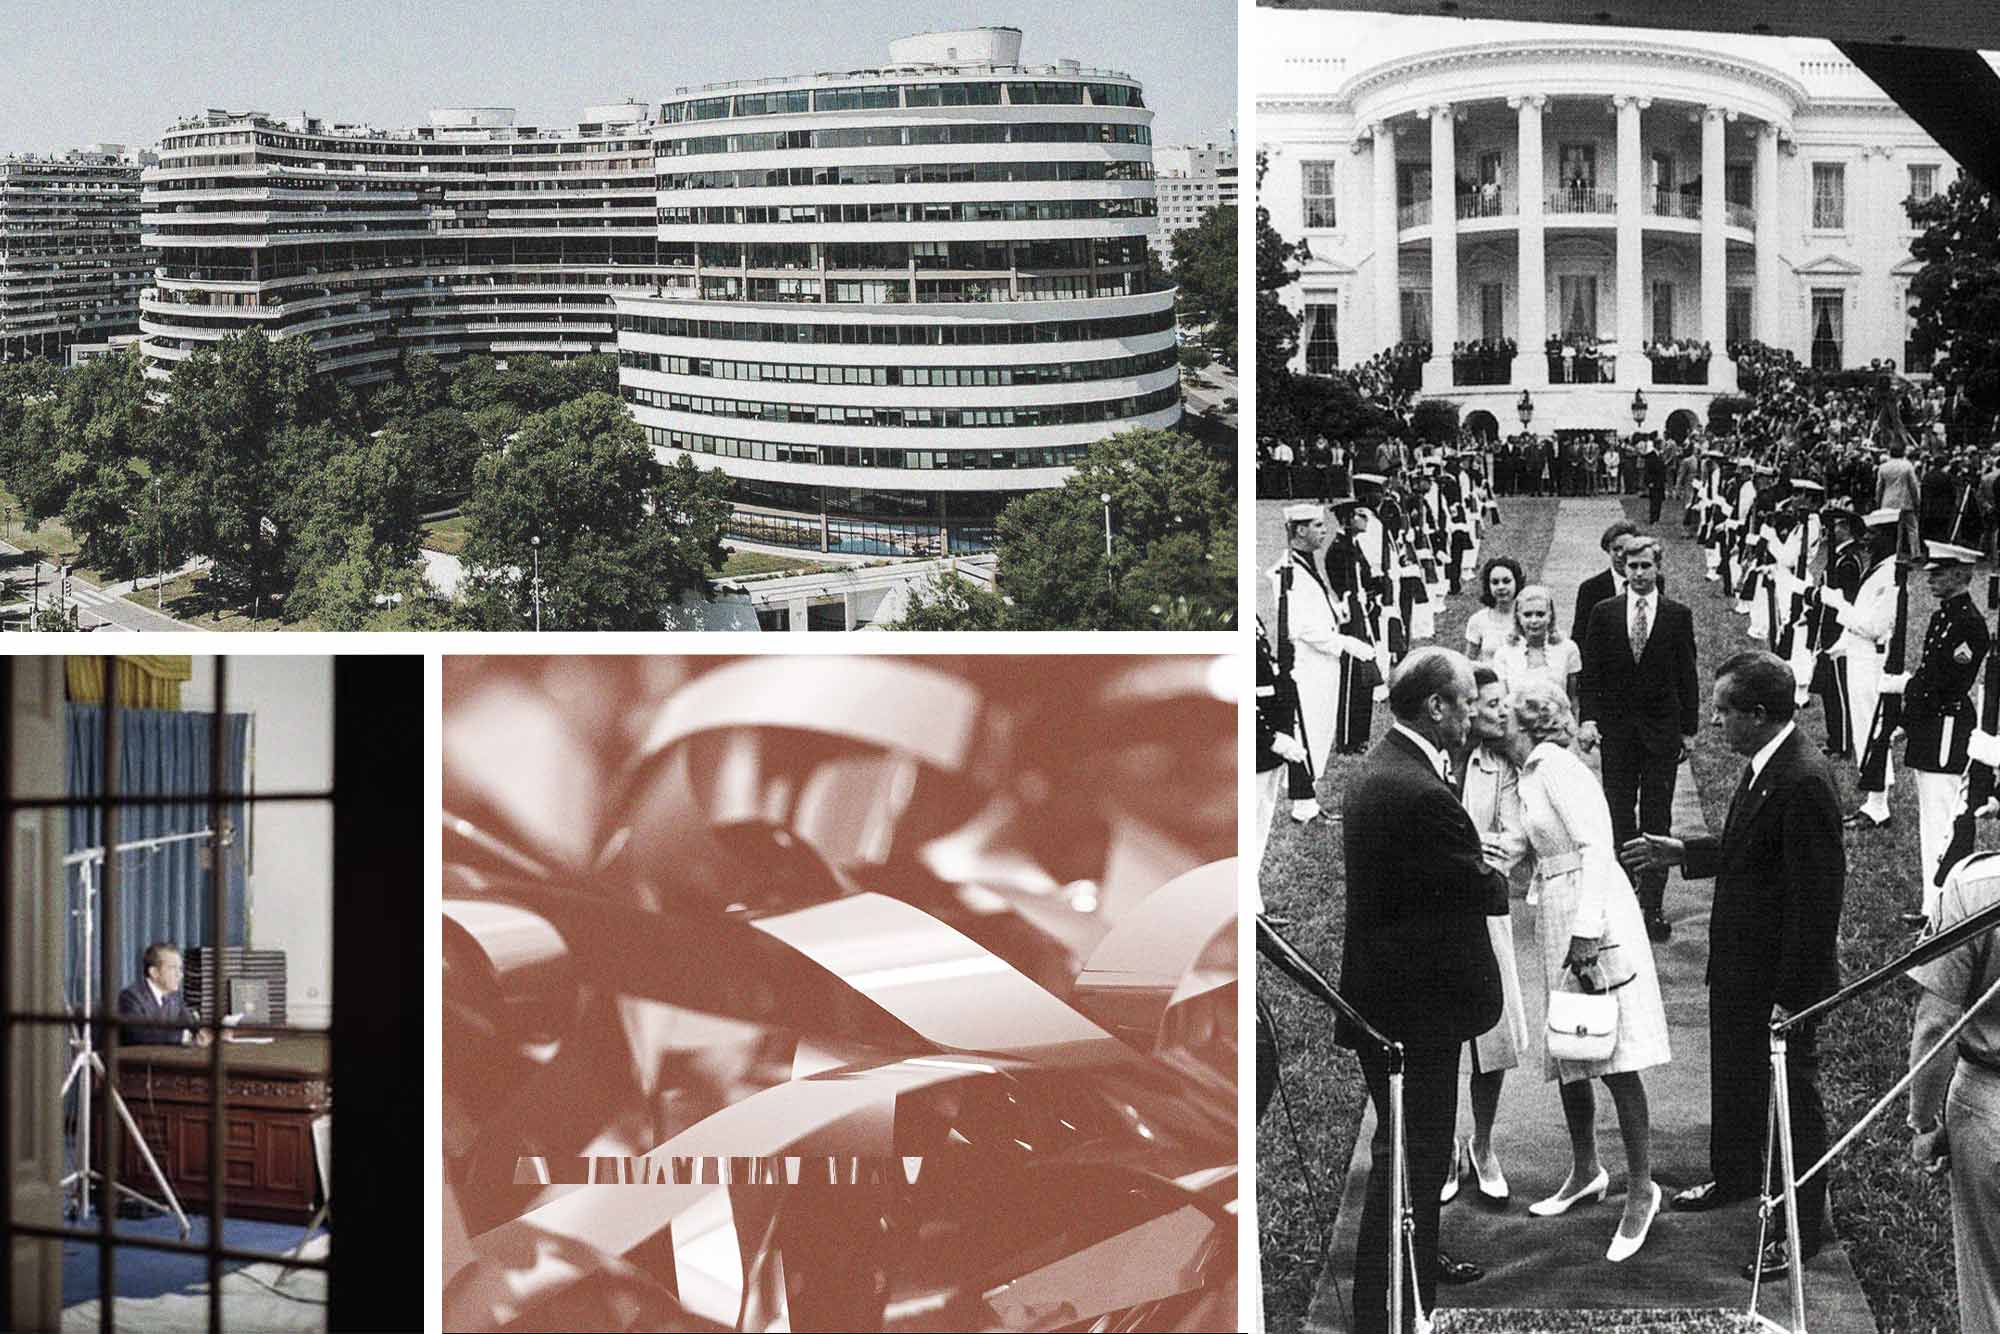 Collage of Watergate imagery including a photo of the hotel, Nixon exiting the White House lawn, Nixon sitting at his desk, and some audio tape